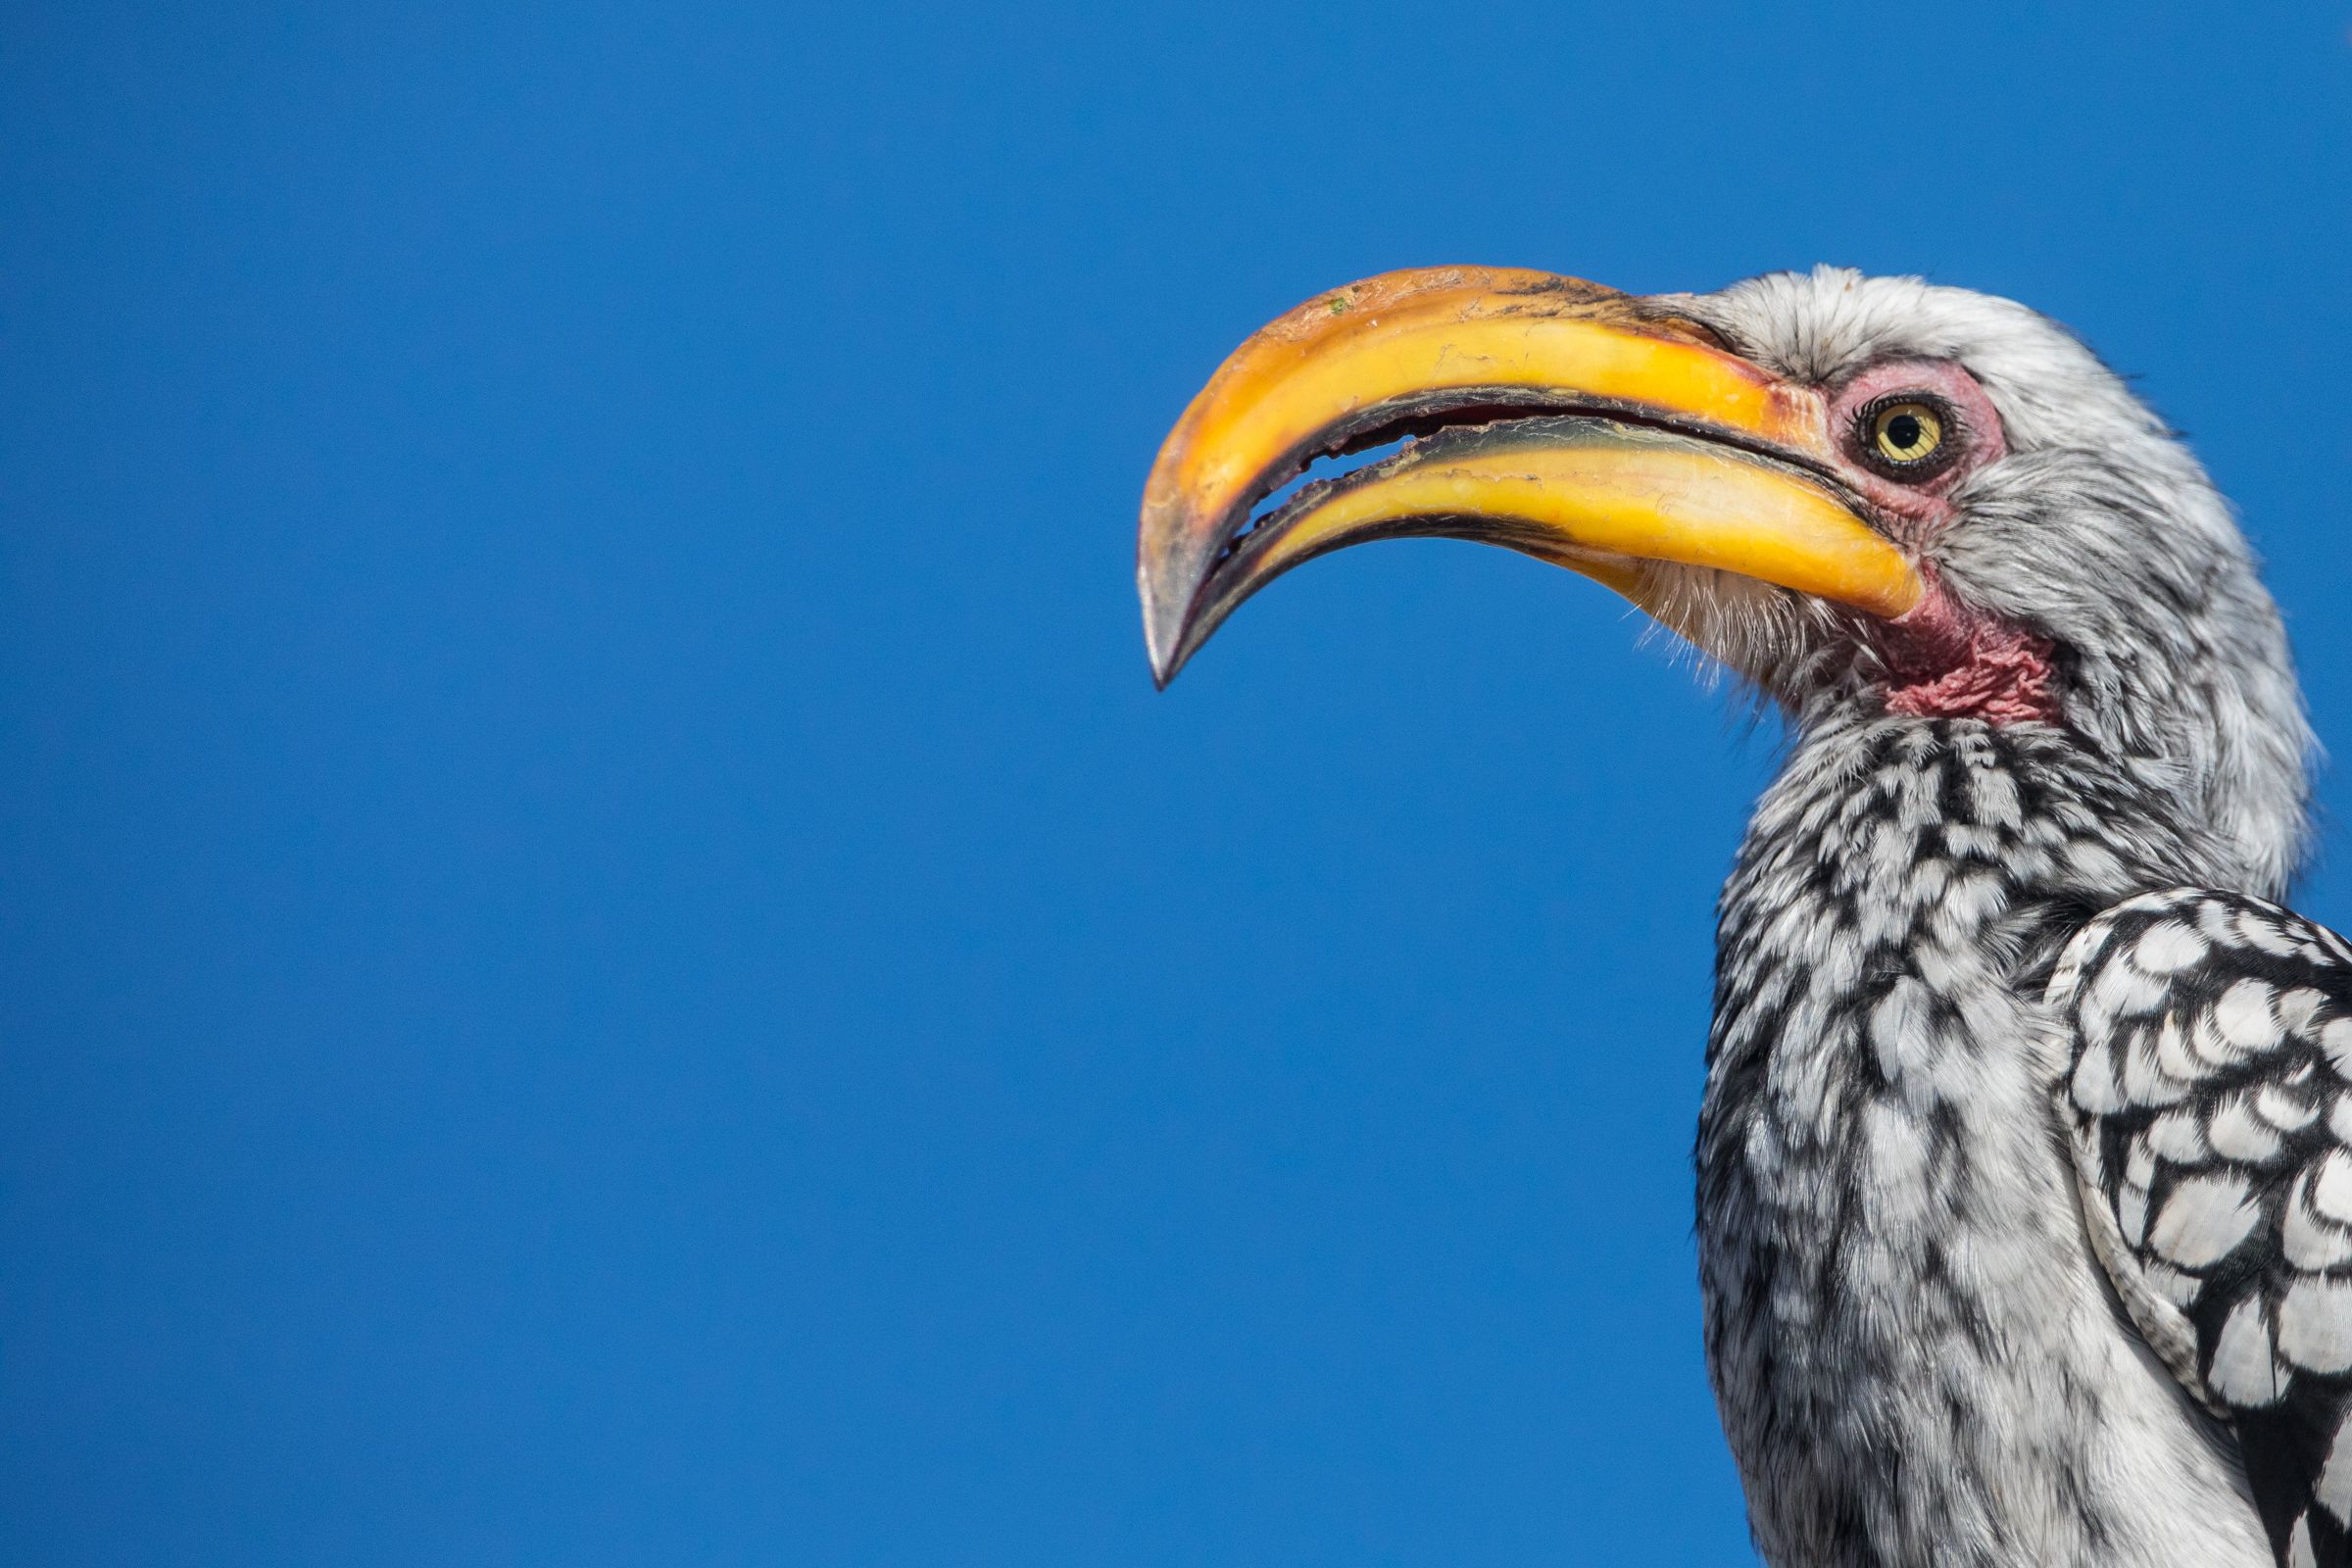 Southern Yellow-billed Hornbill on our wildlife photography tour of Namibia